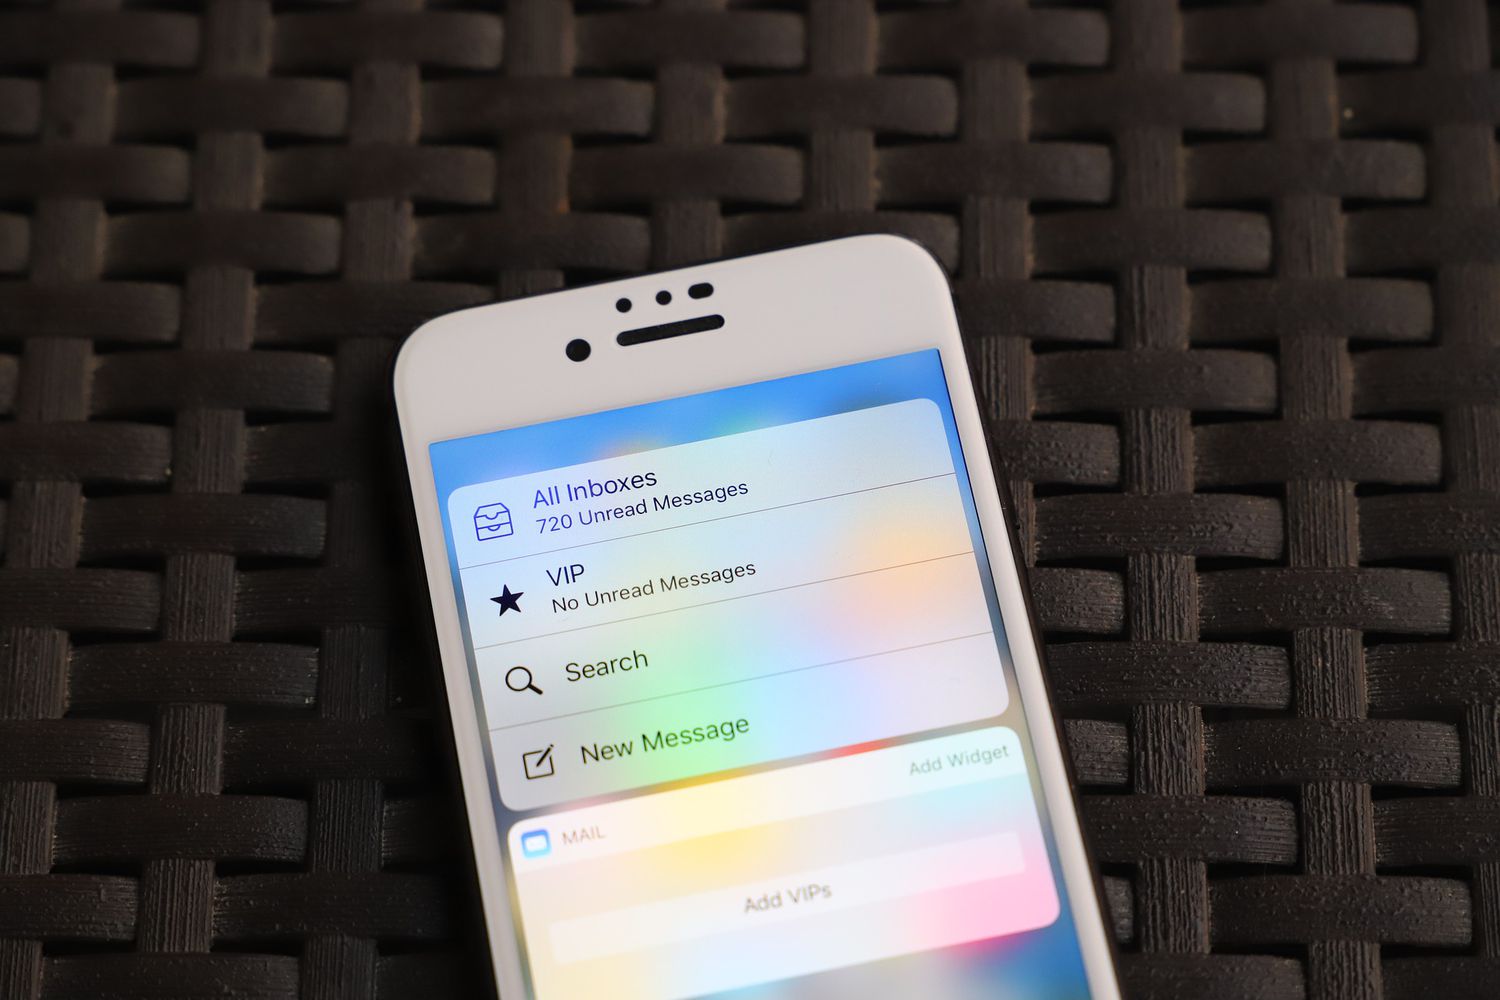 How To Mark Emails As Read Or Unread On IPhone